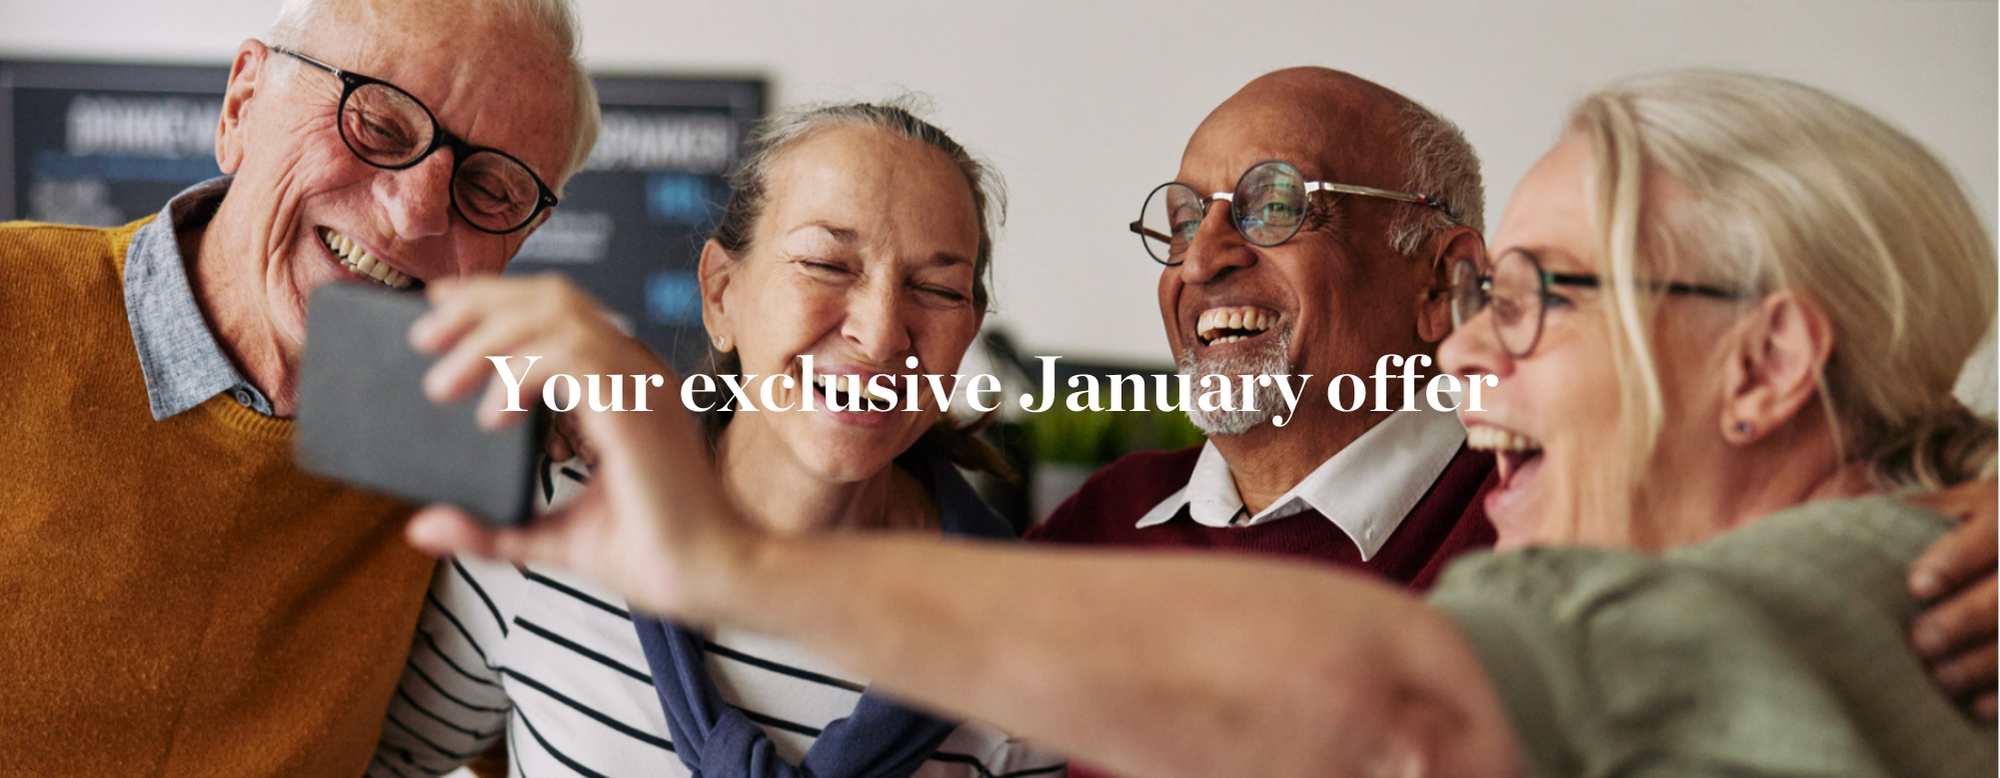 Your exclusive January offer